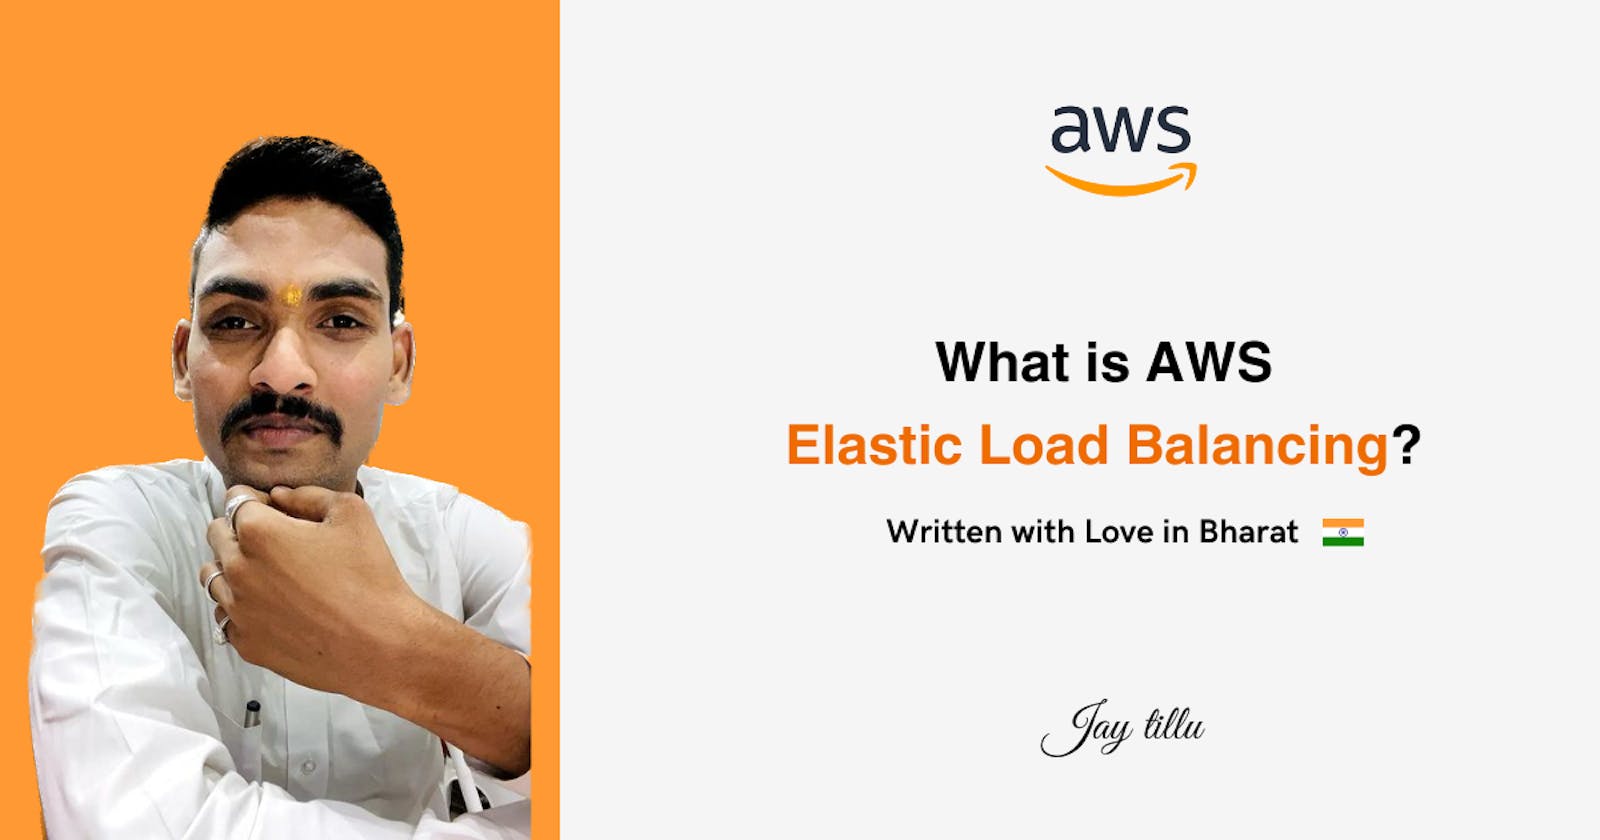 What is Elastic Load Balancing in AWS?